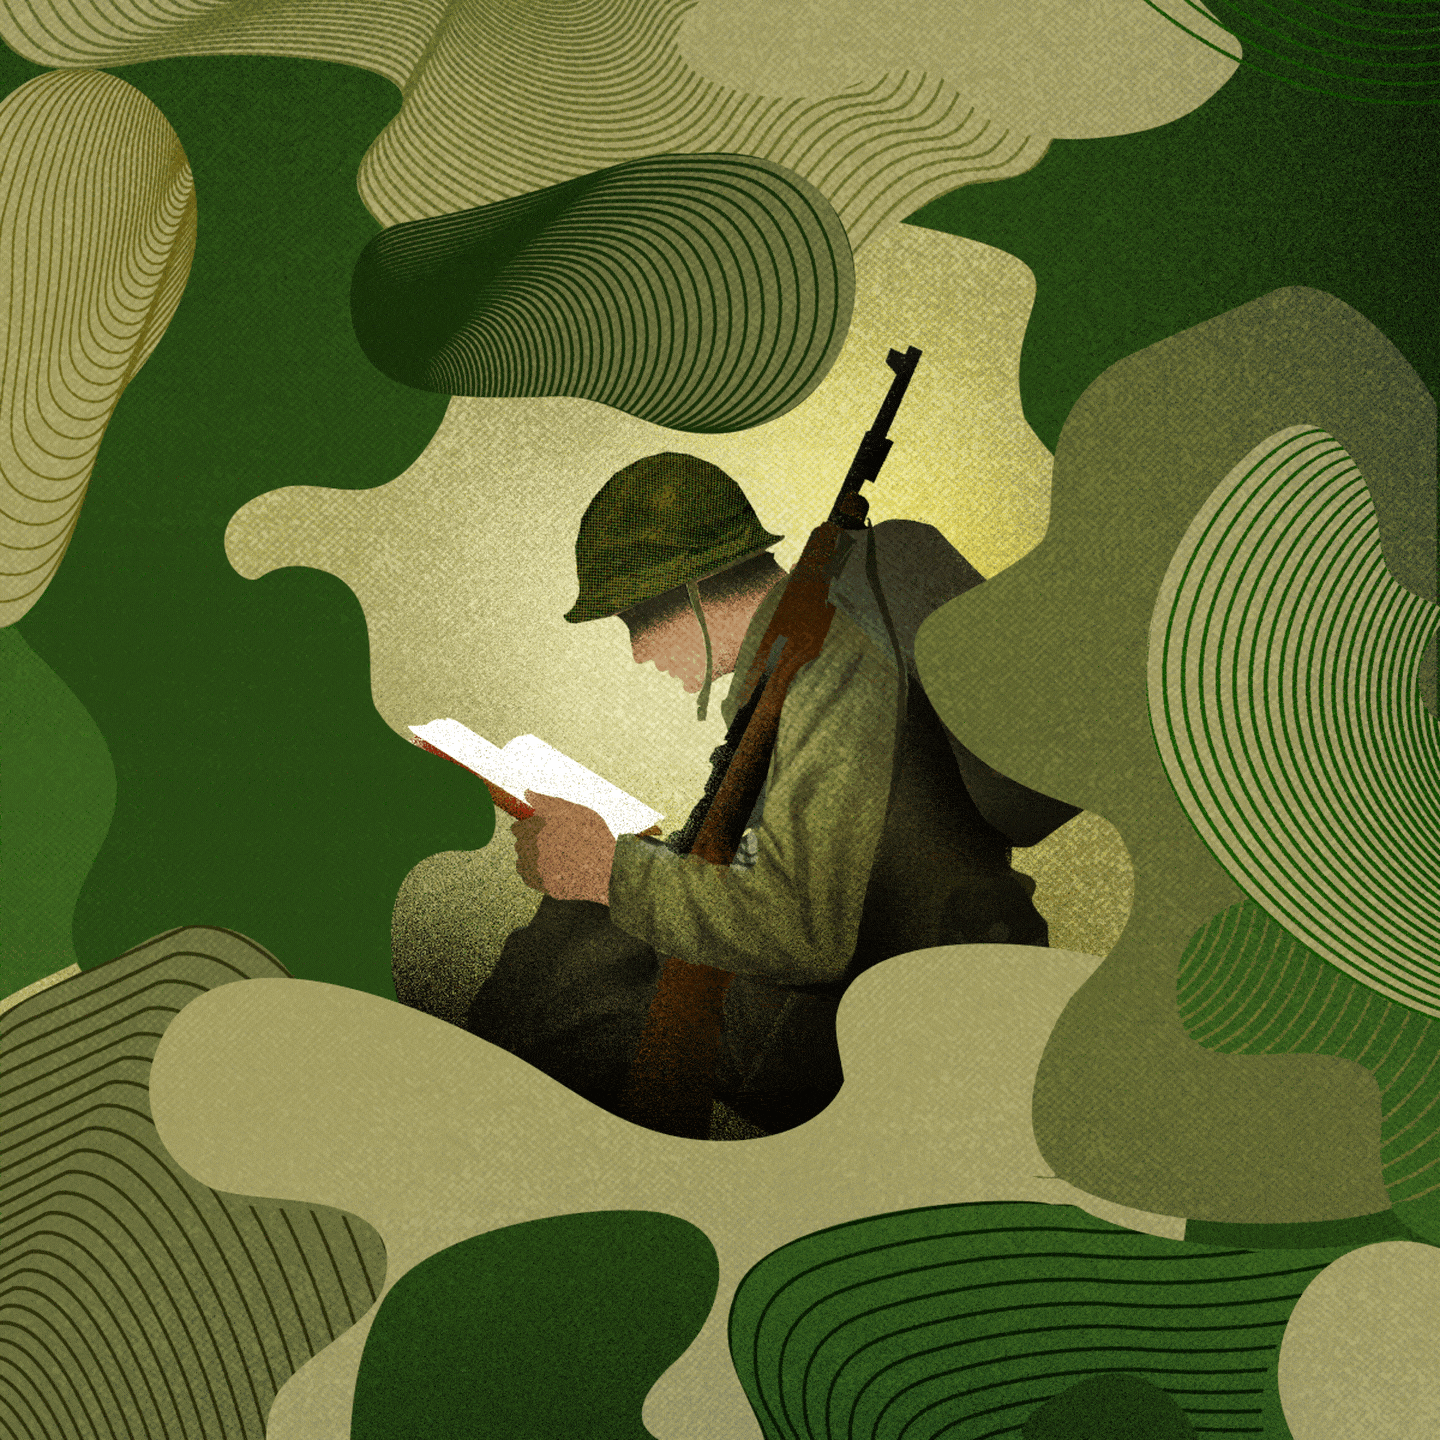 Why Reader’s Digest Has Resonated with Military Families for 100 Years